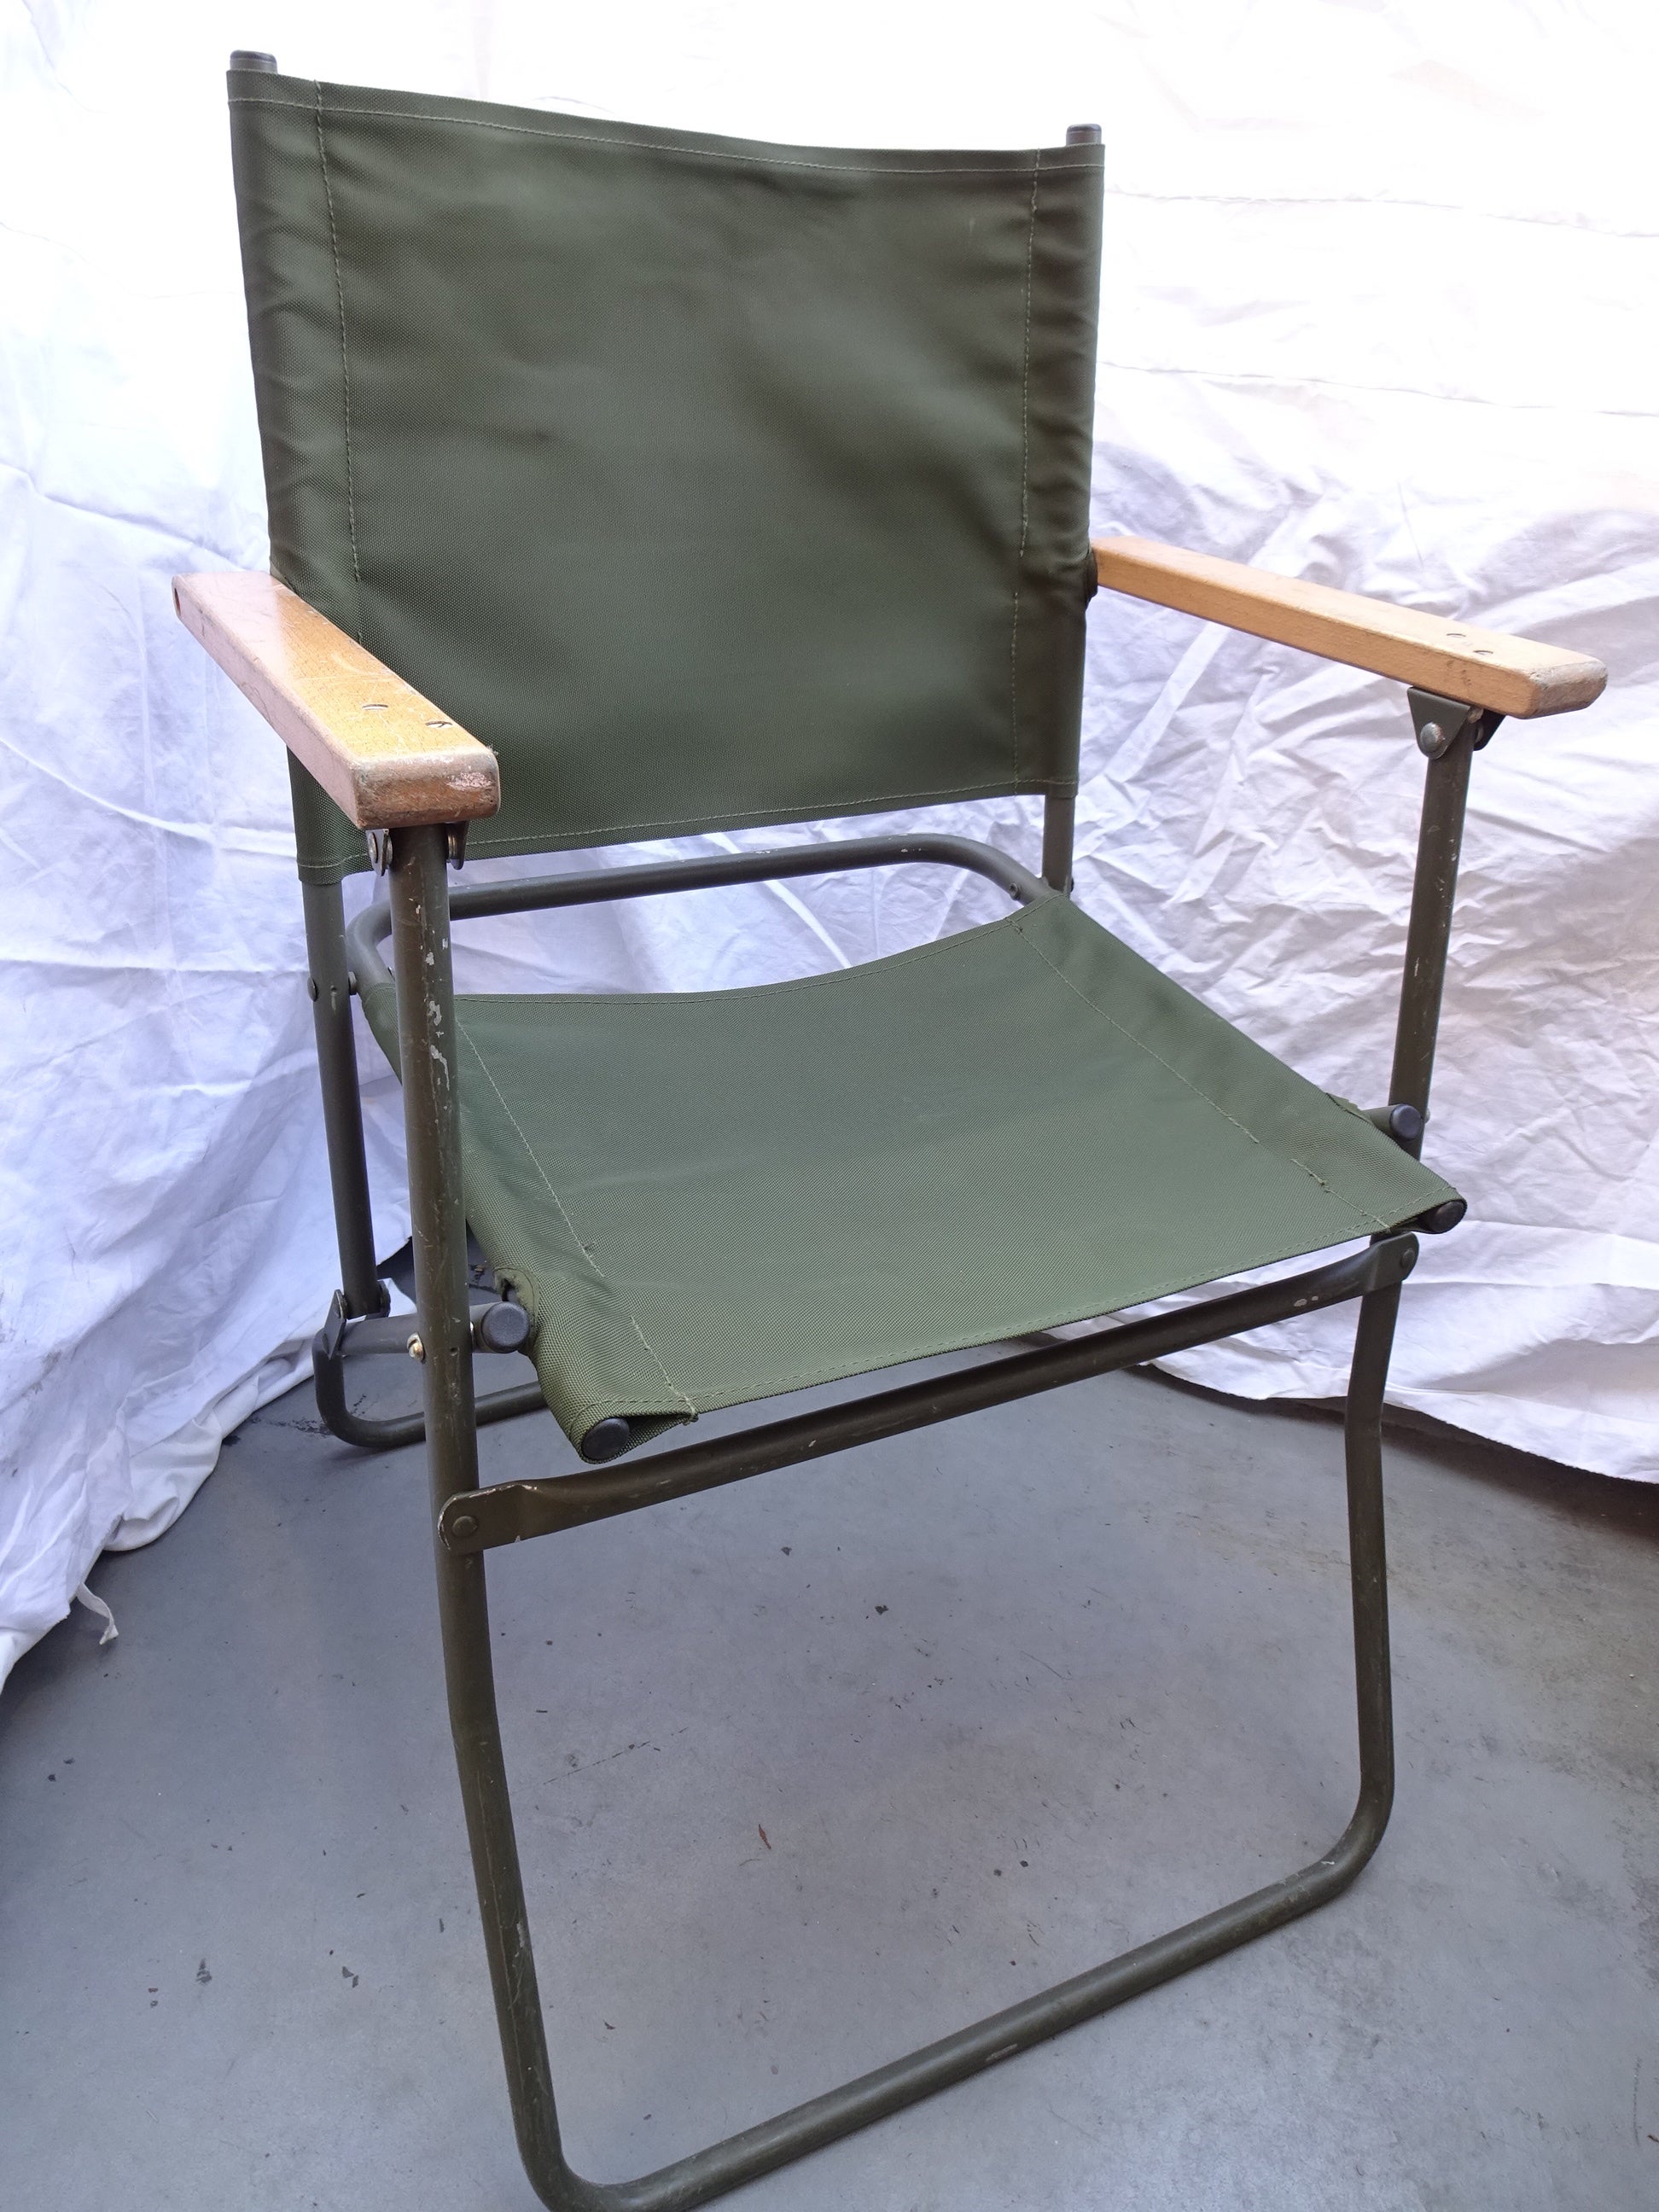 70's〜 Vintage British Army Rover Chairs! | ILLMINATE blog